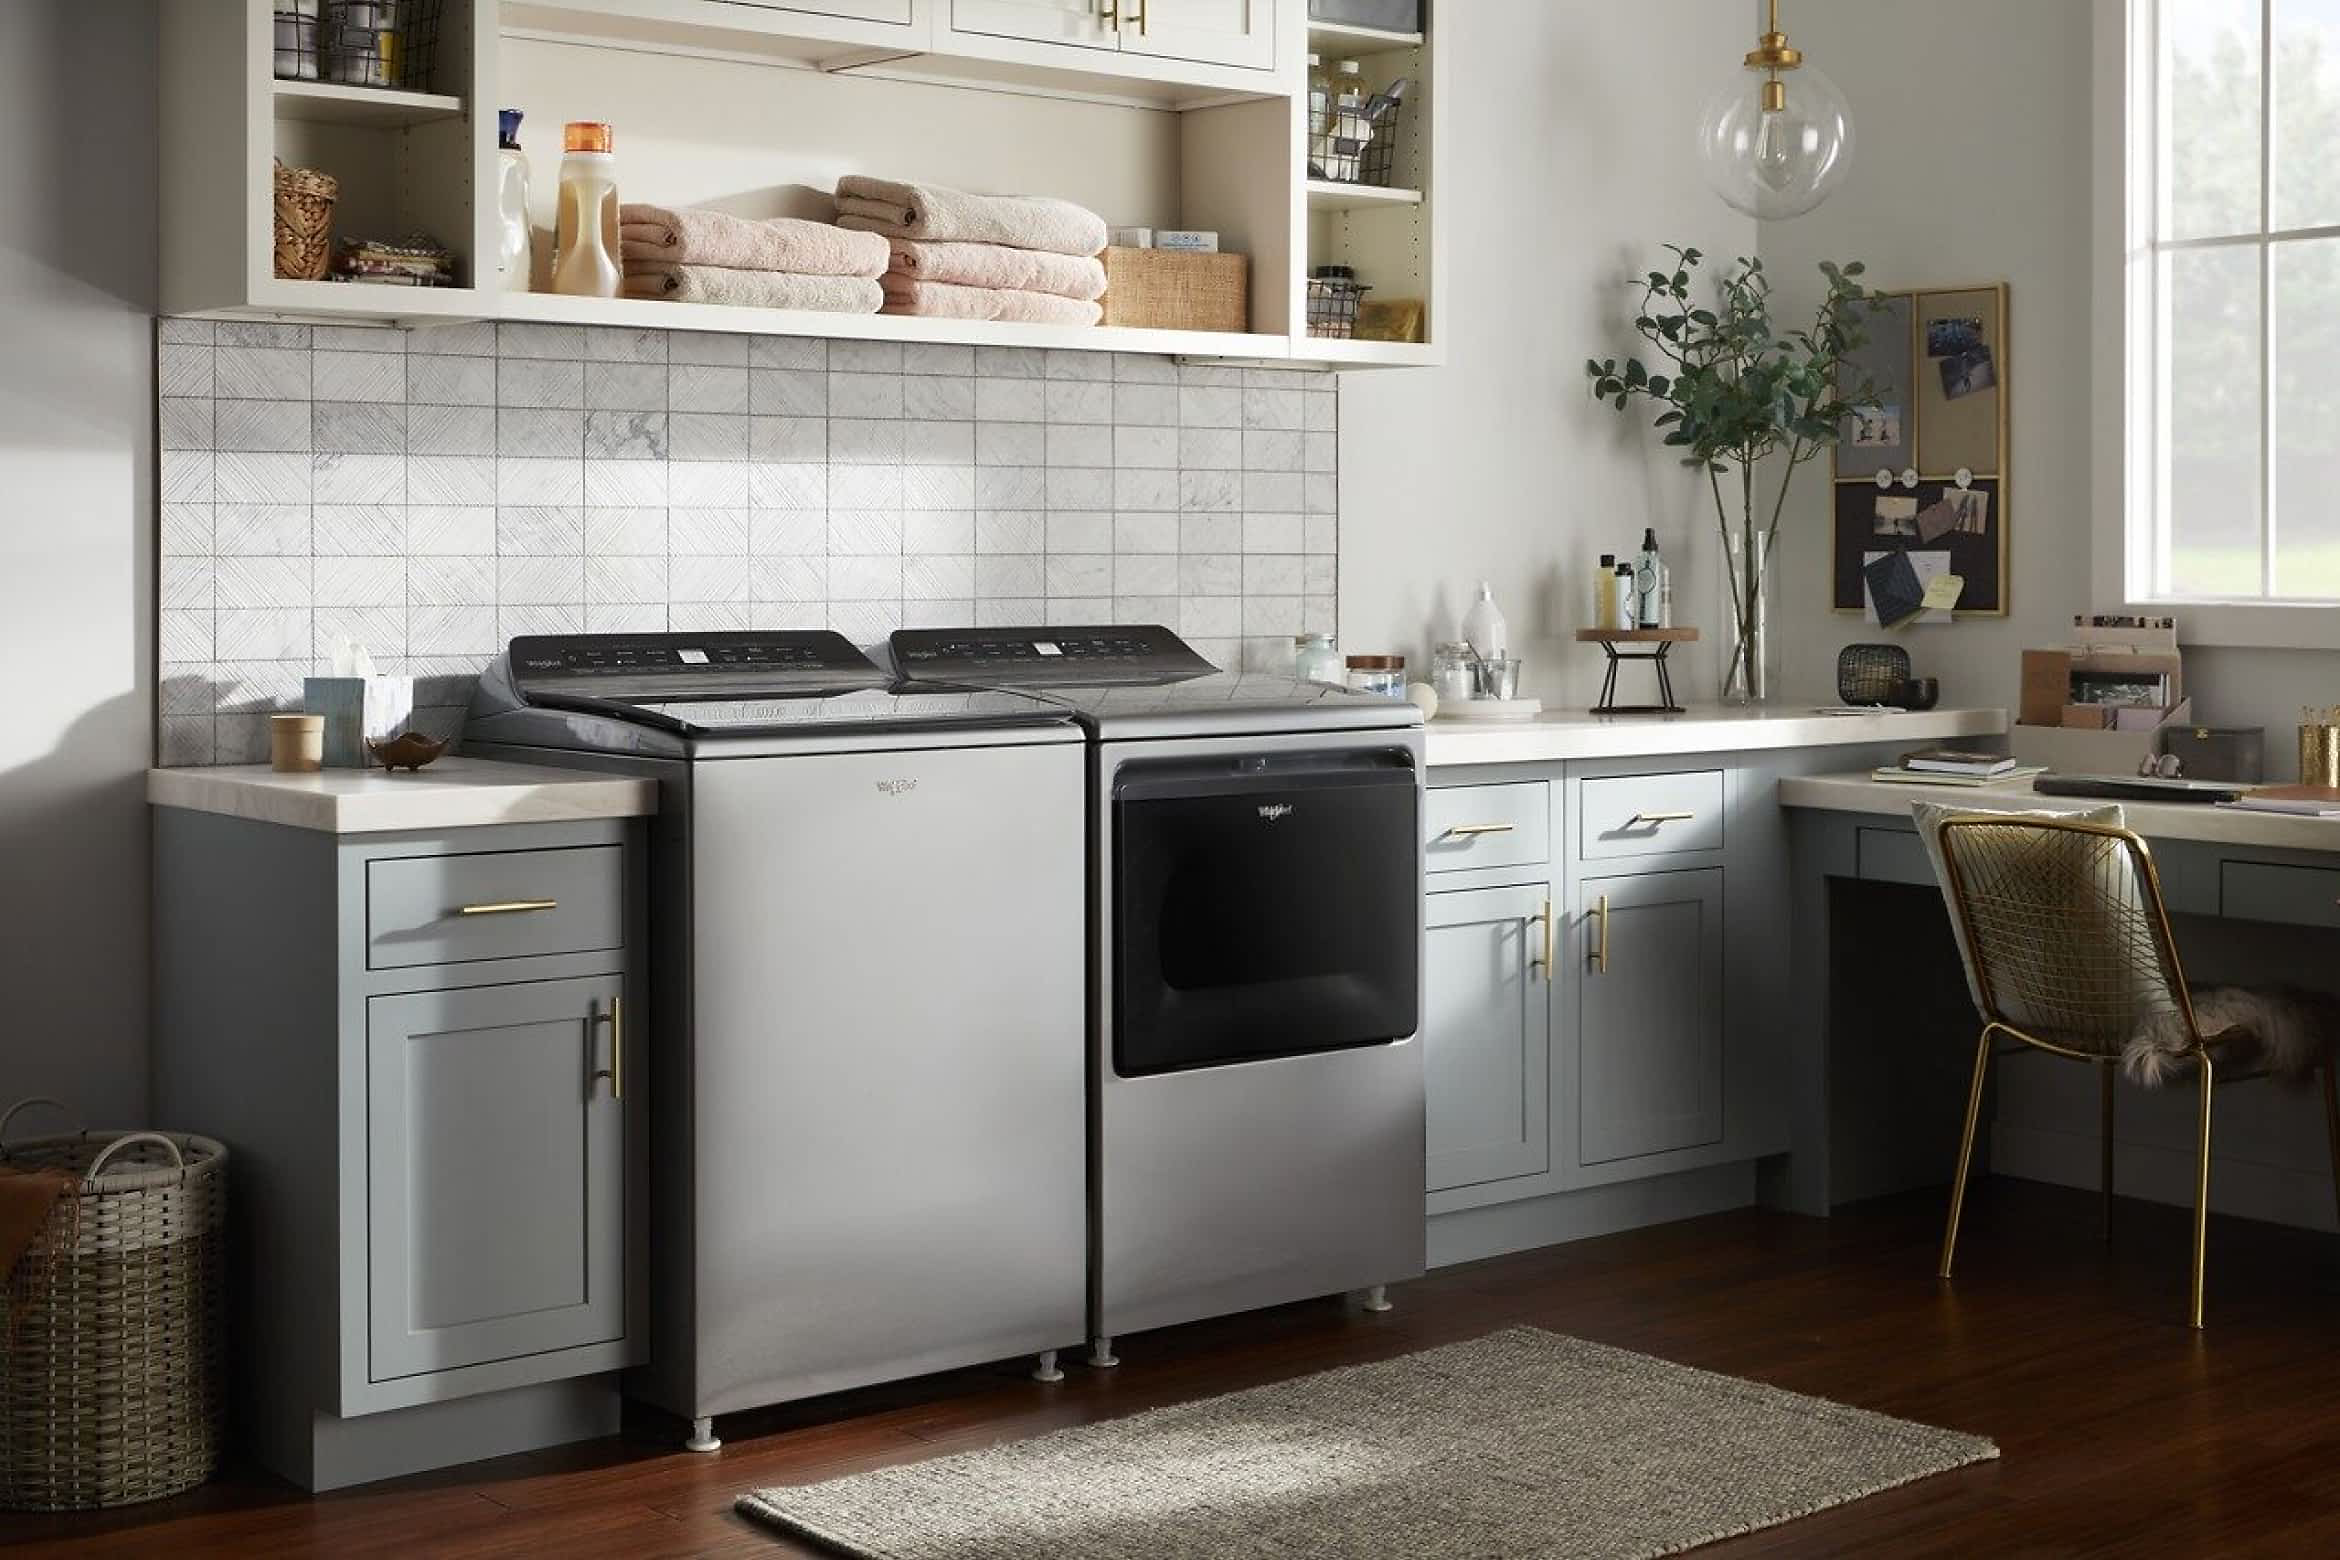 A Whirlpool® Top Load Washer & Dryer Set in a modern home